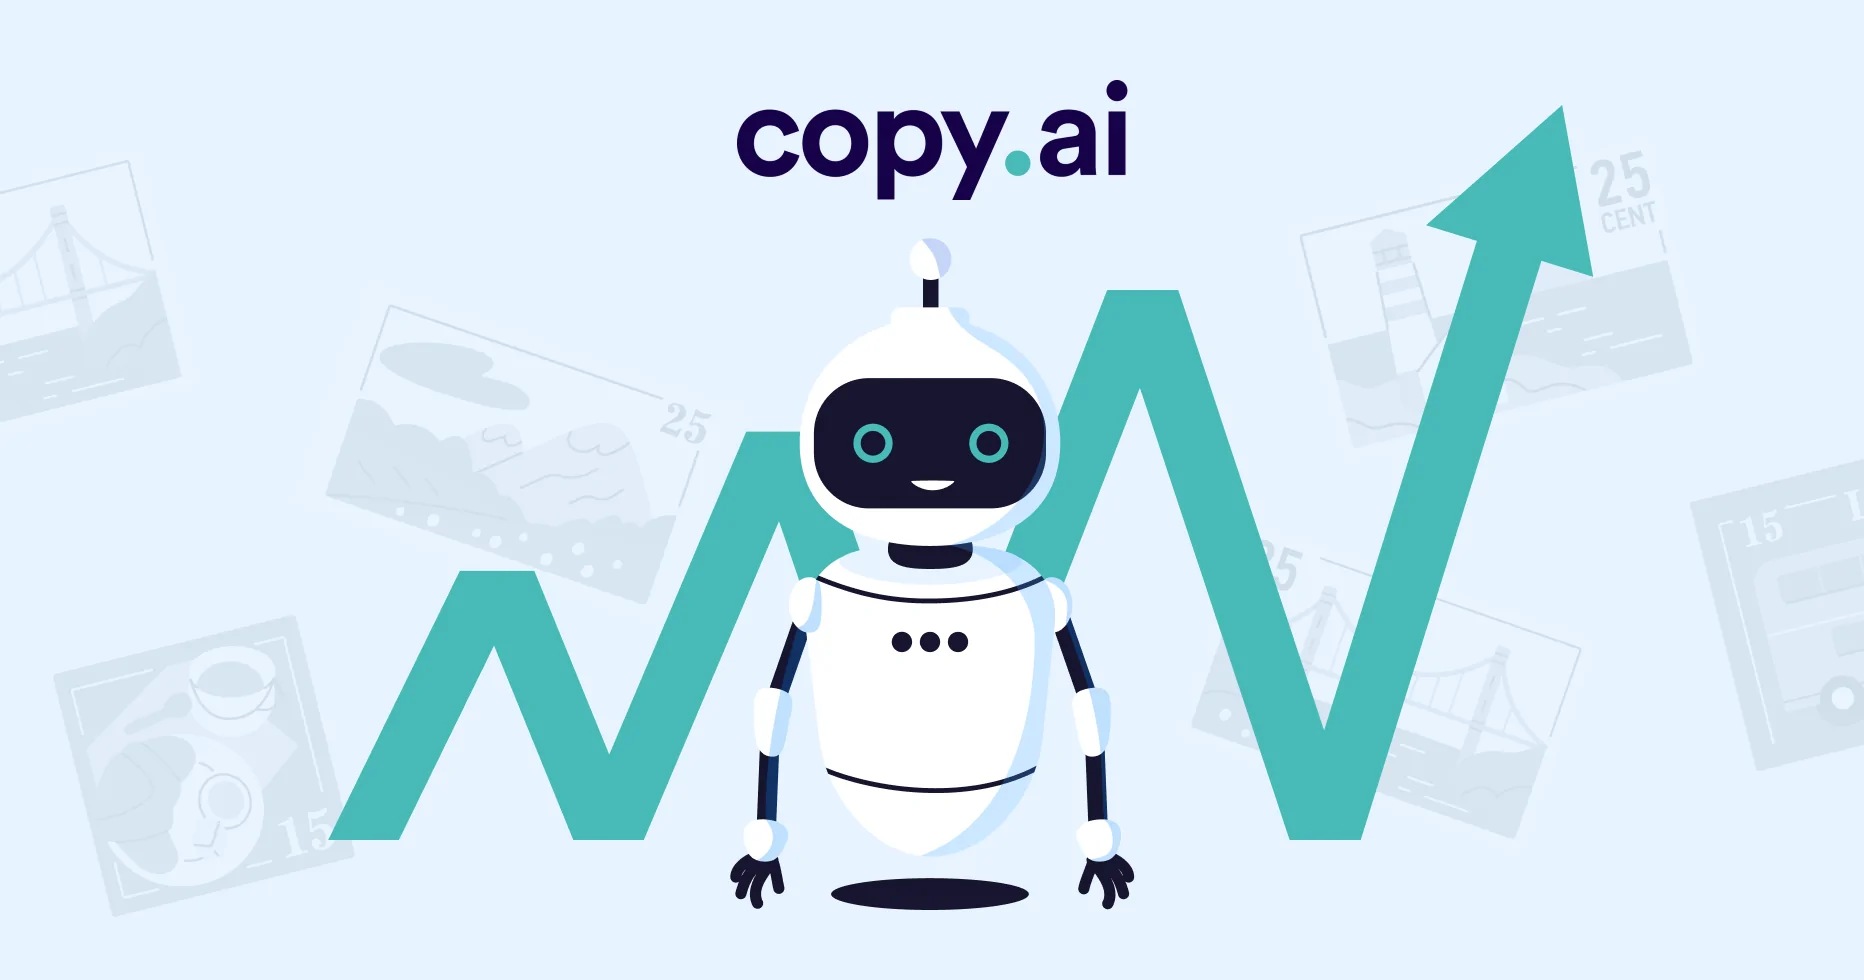 content writers have been searching for an AI content creation solution to lighten their workloads ever before OpenAI's ChatGPT was released.